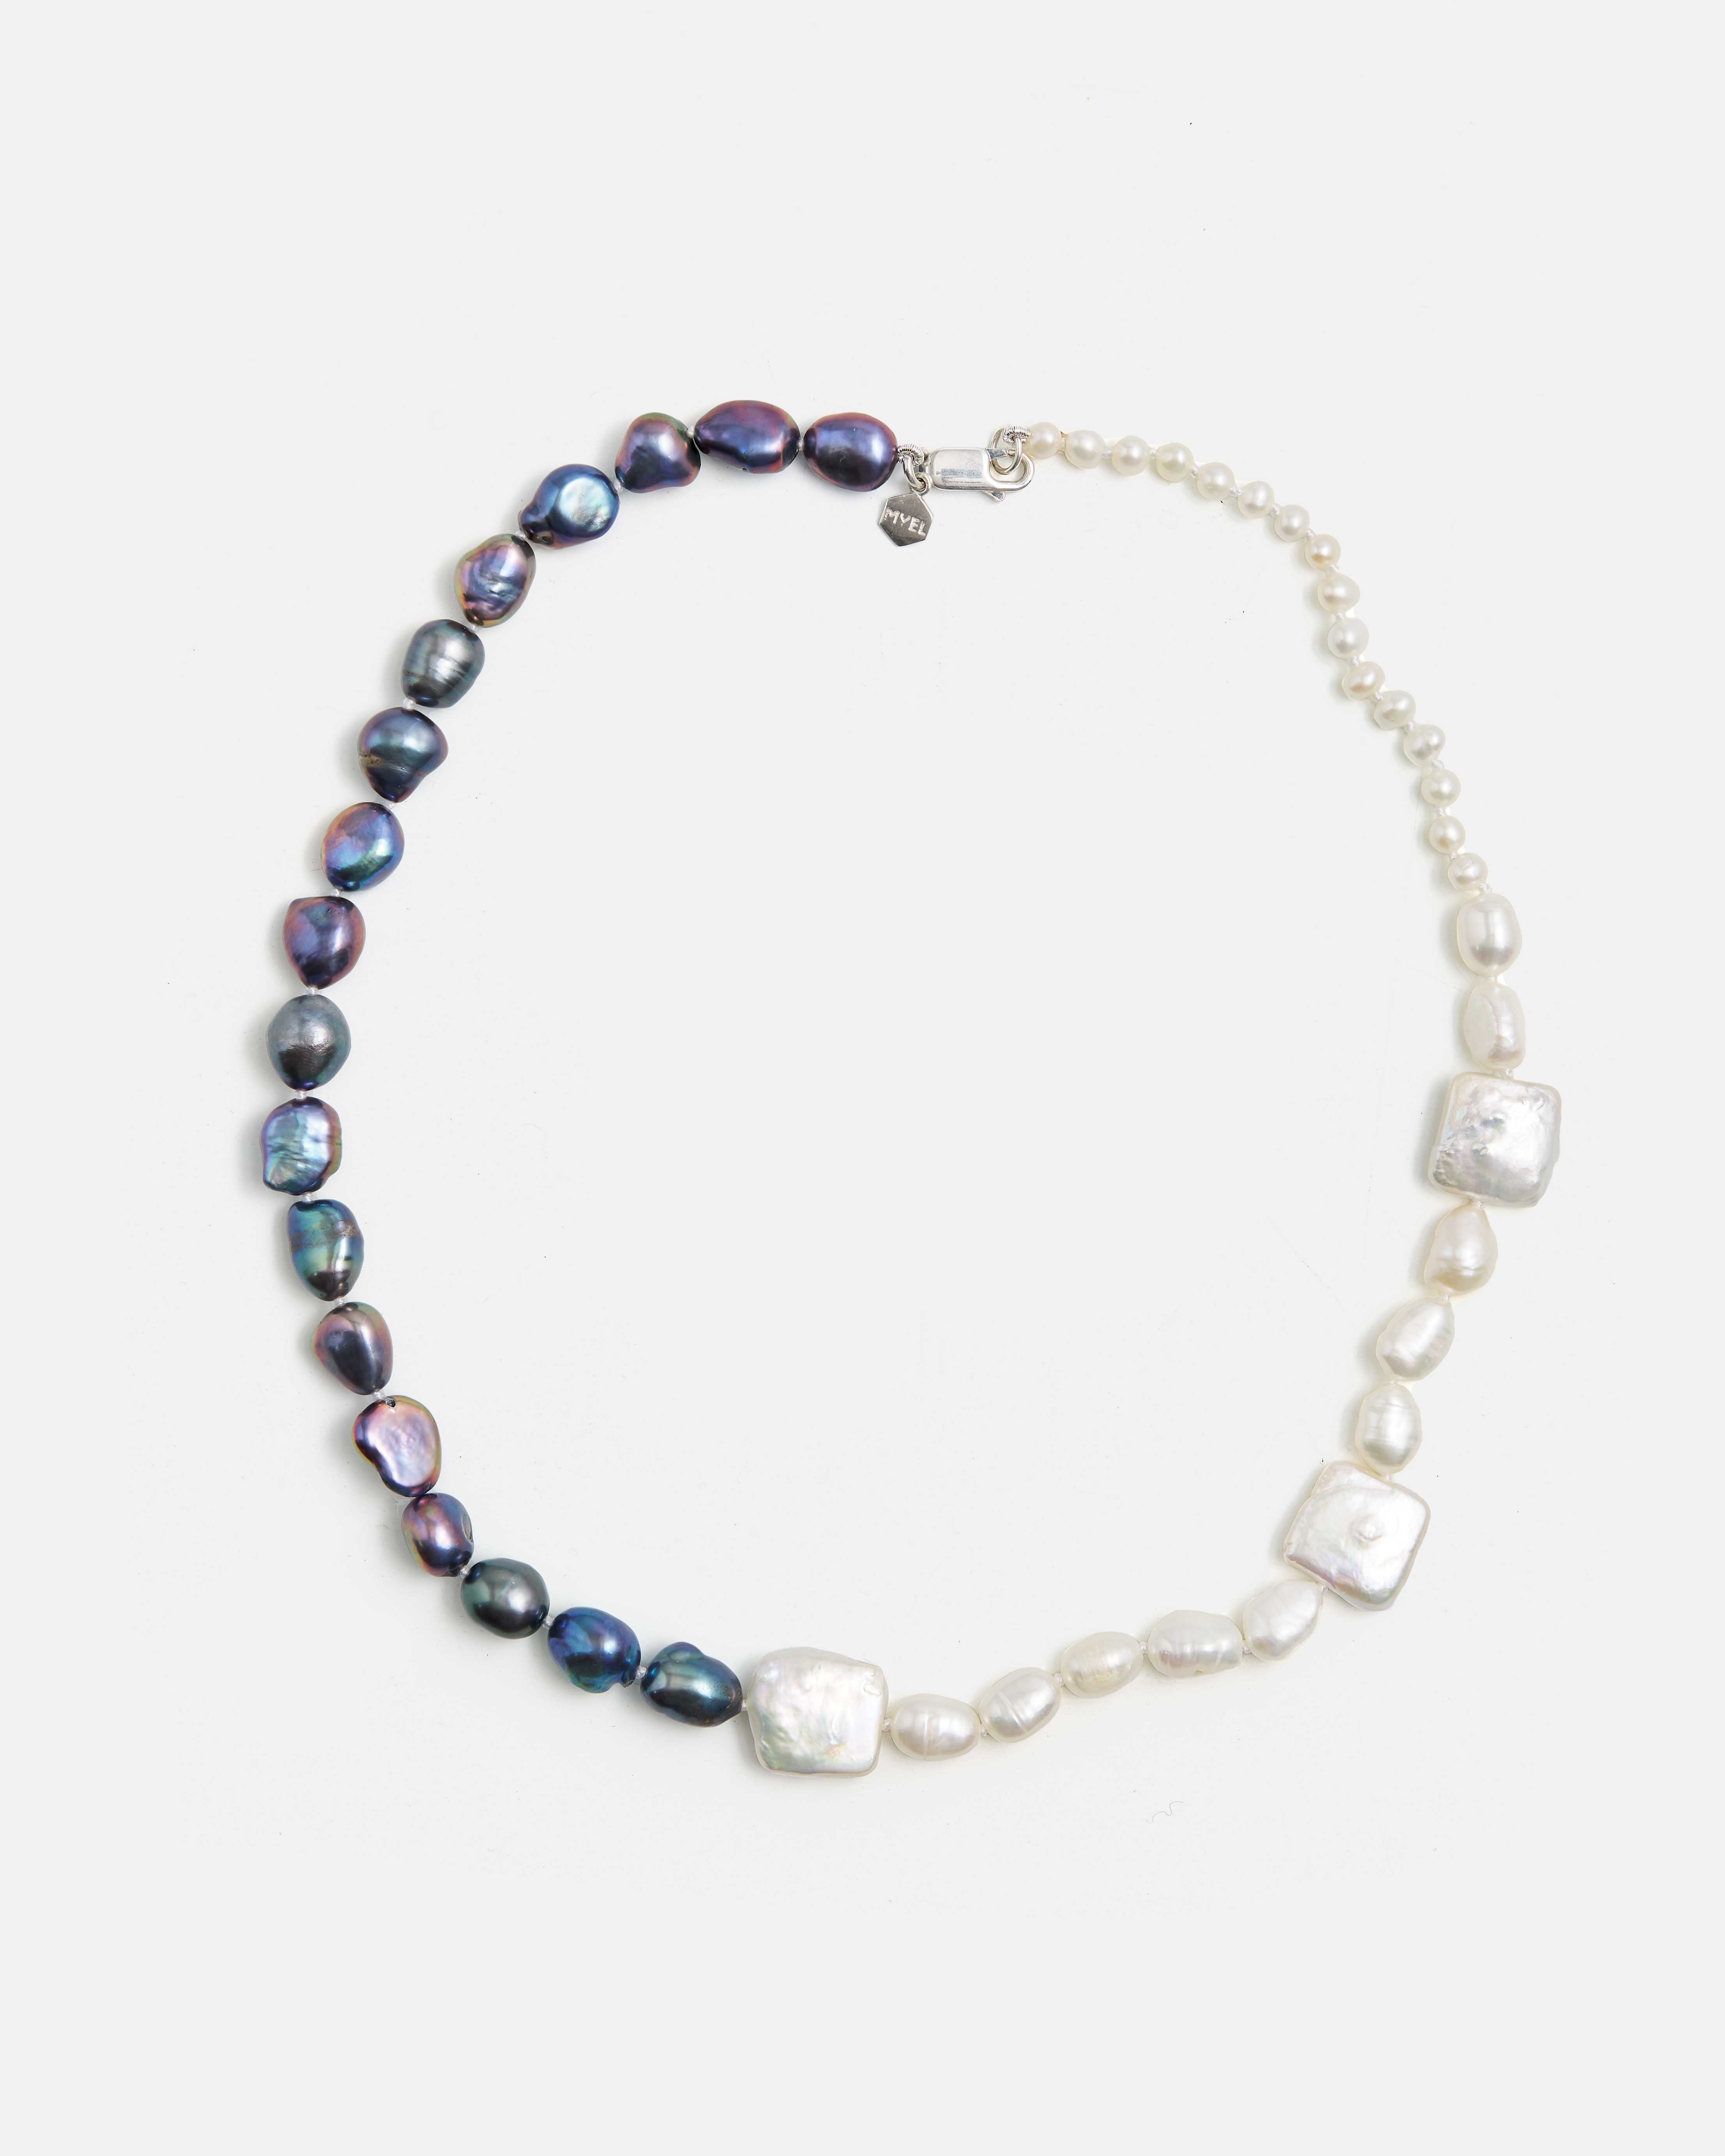 Neptune Black Iridescent and White Pearl Necklace